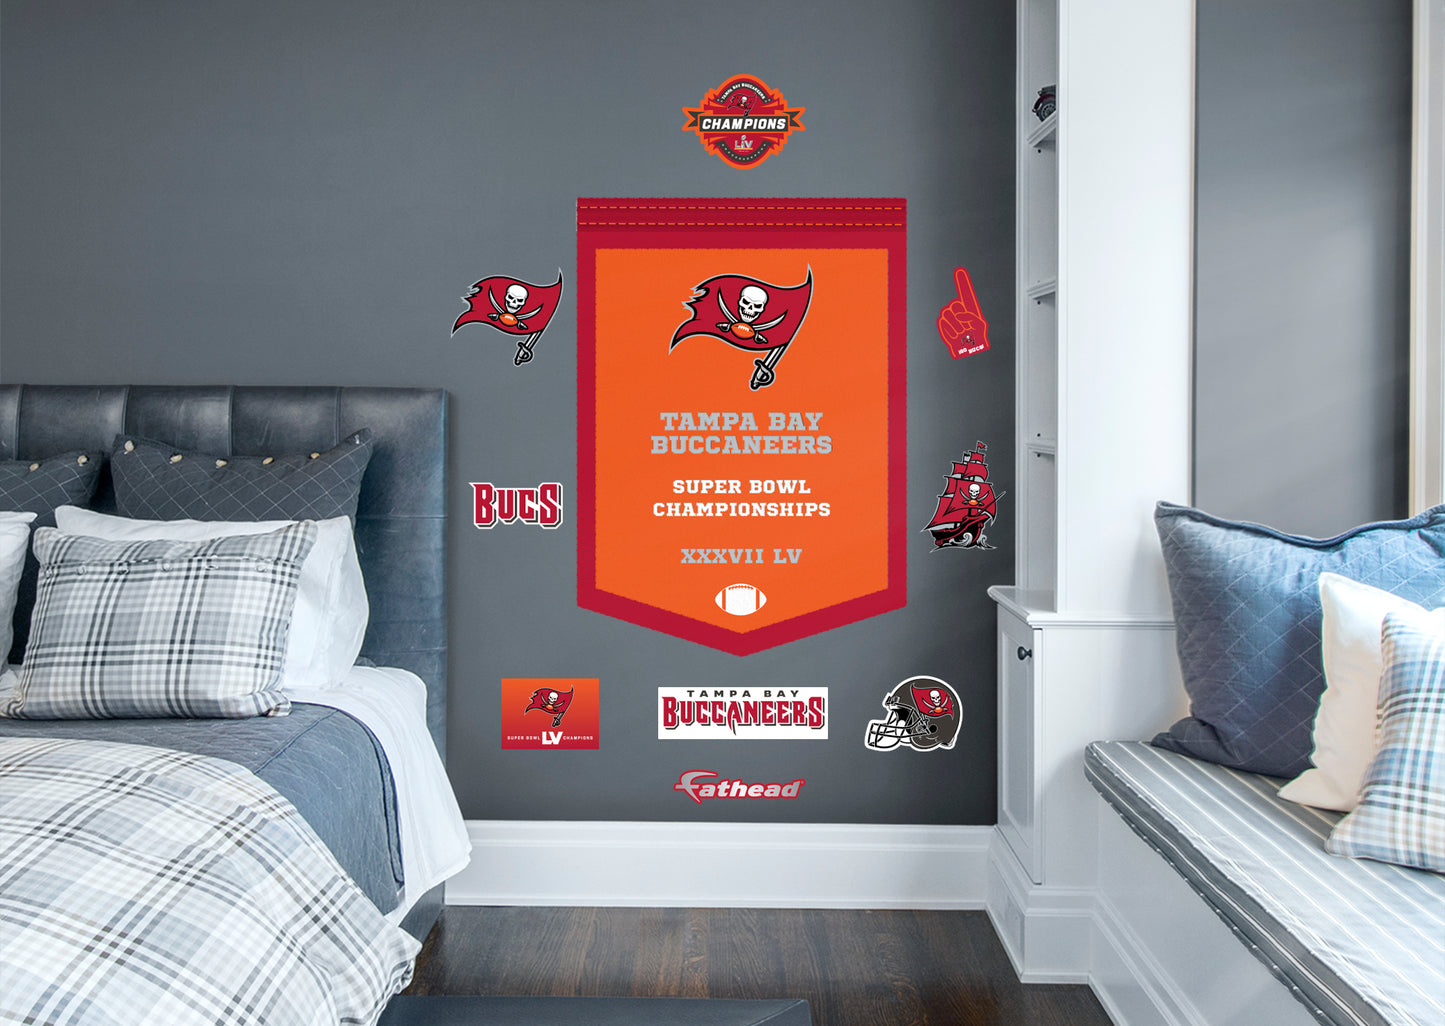 Tampa Bay Buccaneers 2021 Super Bowl Championships Banner  - Officially Licensed NFL Removable Wall Decal